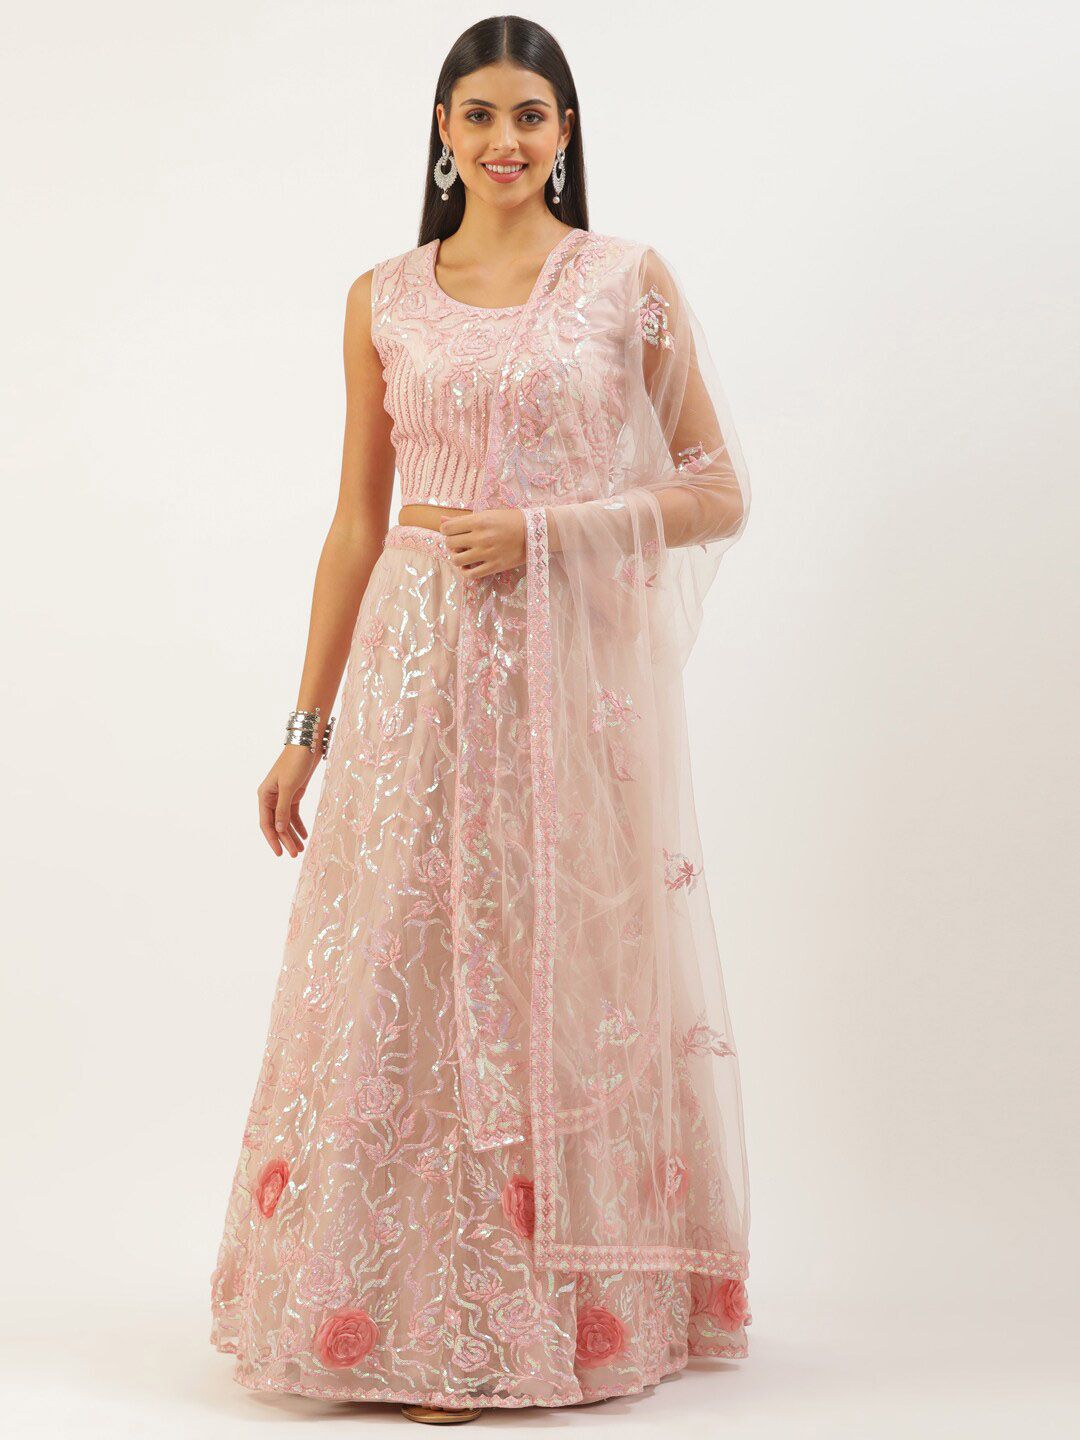 MANOHARI Coral & Embellished Sequinned Semi-Stitched Lehenga & Unstitched Blouse With Dupatta Price in India